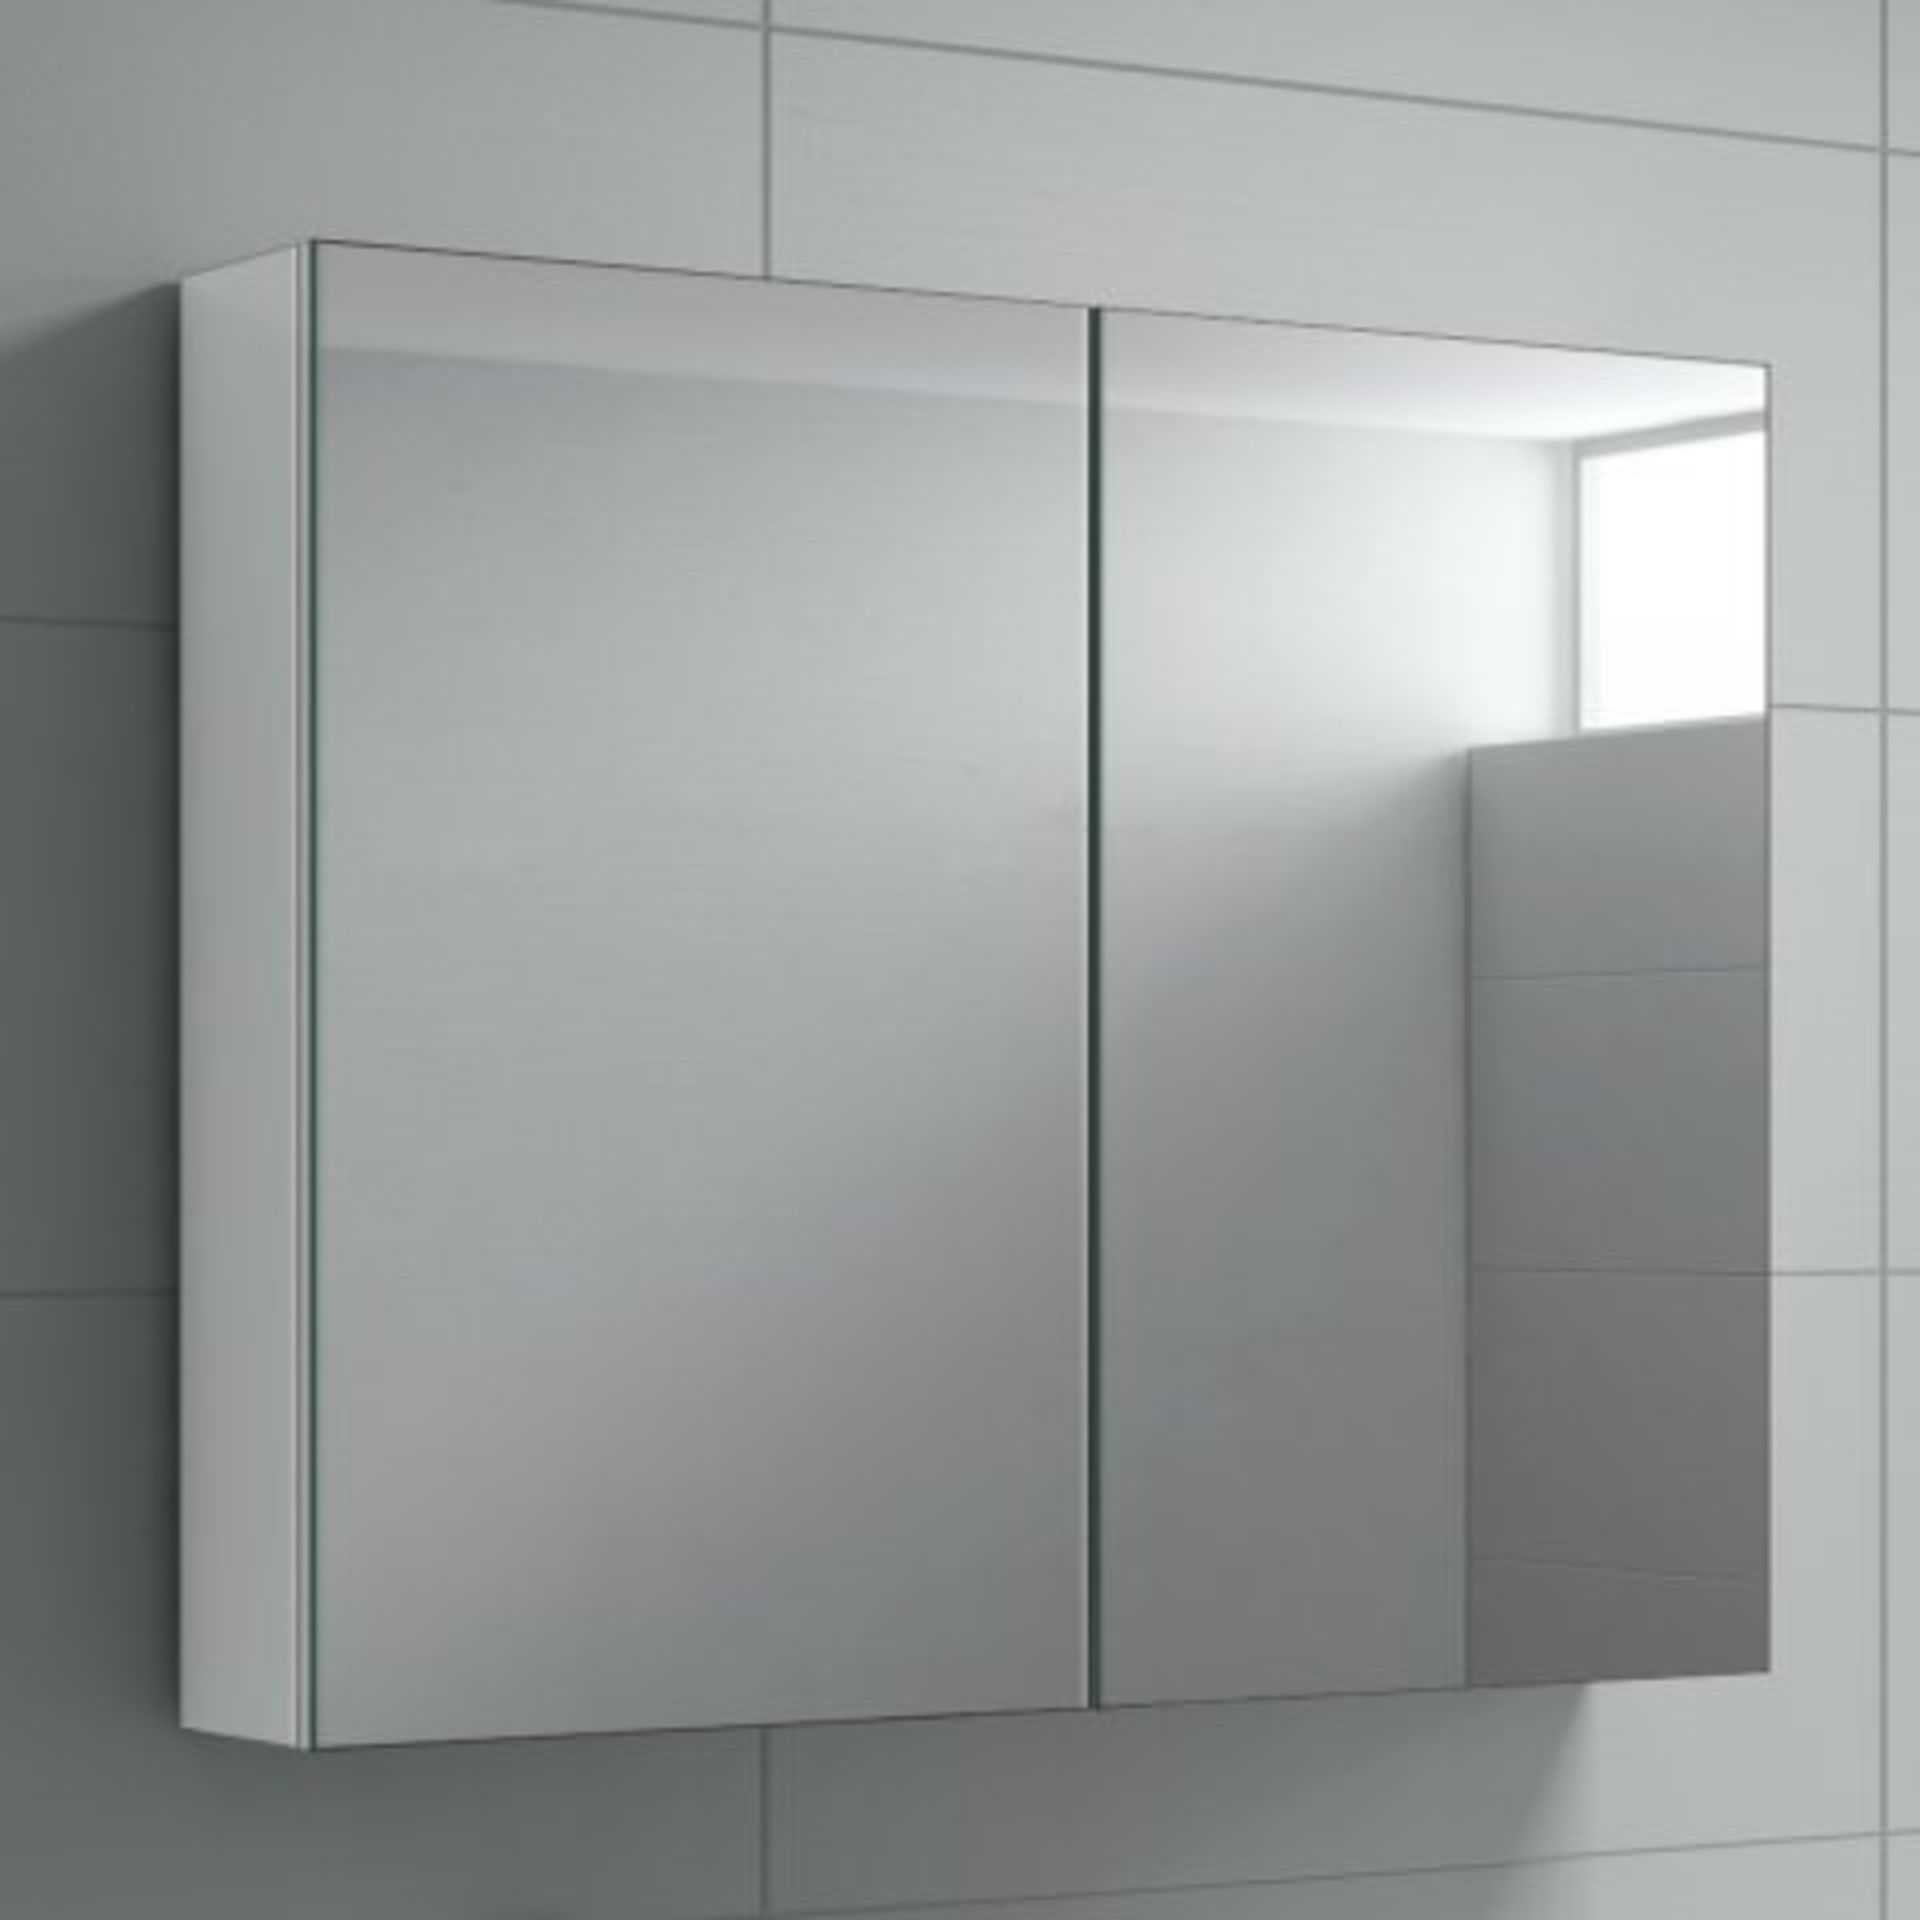 (T203) 667mm Harper Gloss White Double Door Mirror Cabinet RRP £224.99 Reflection Perfection The - Image 5 of 5